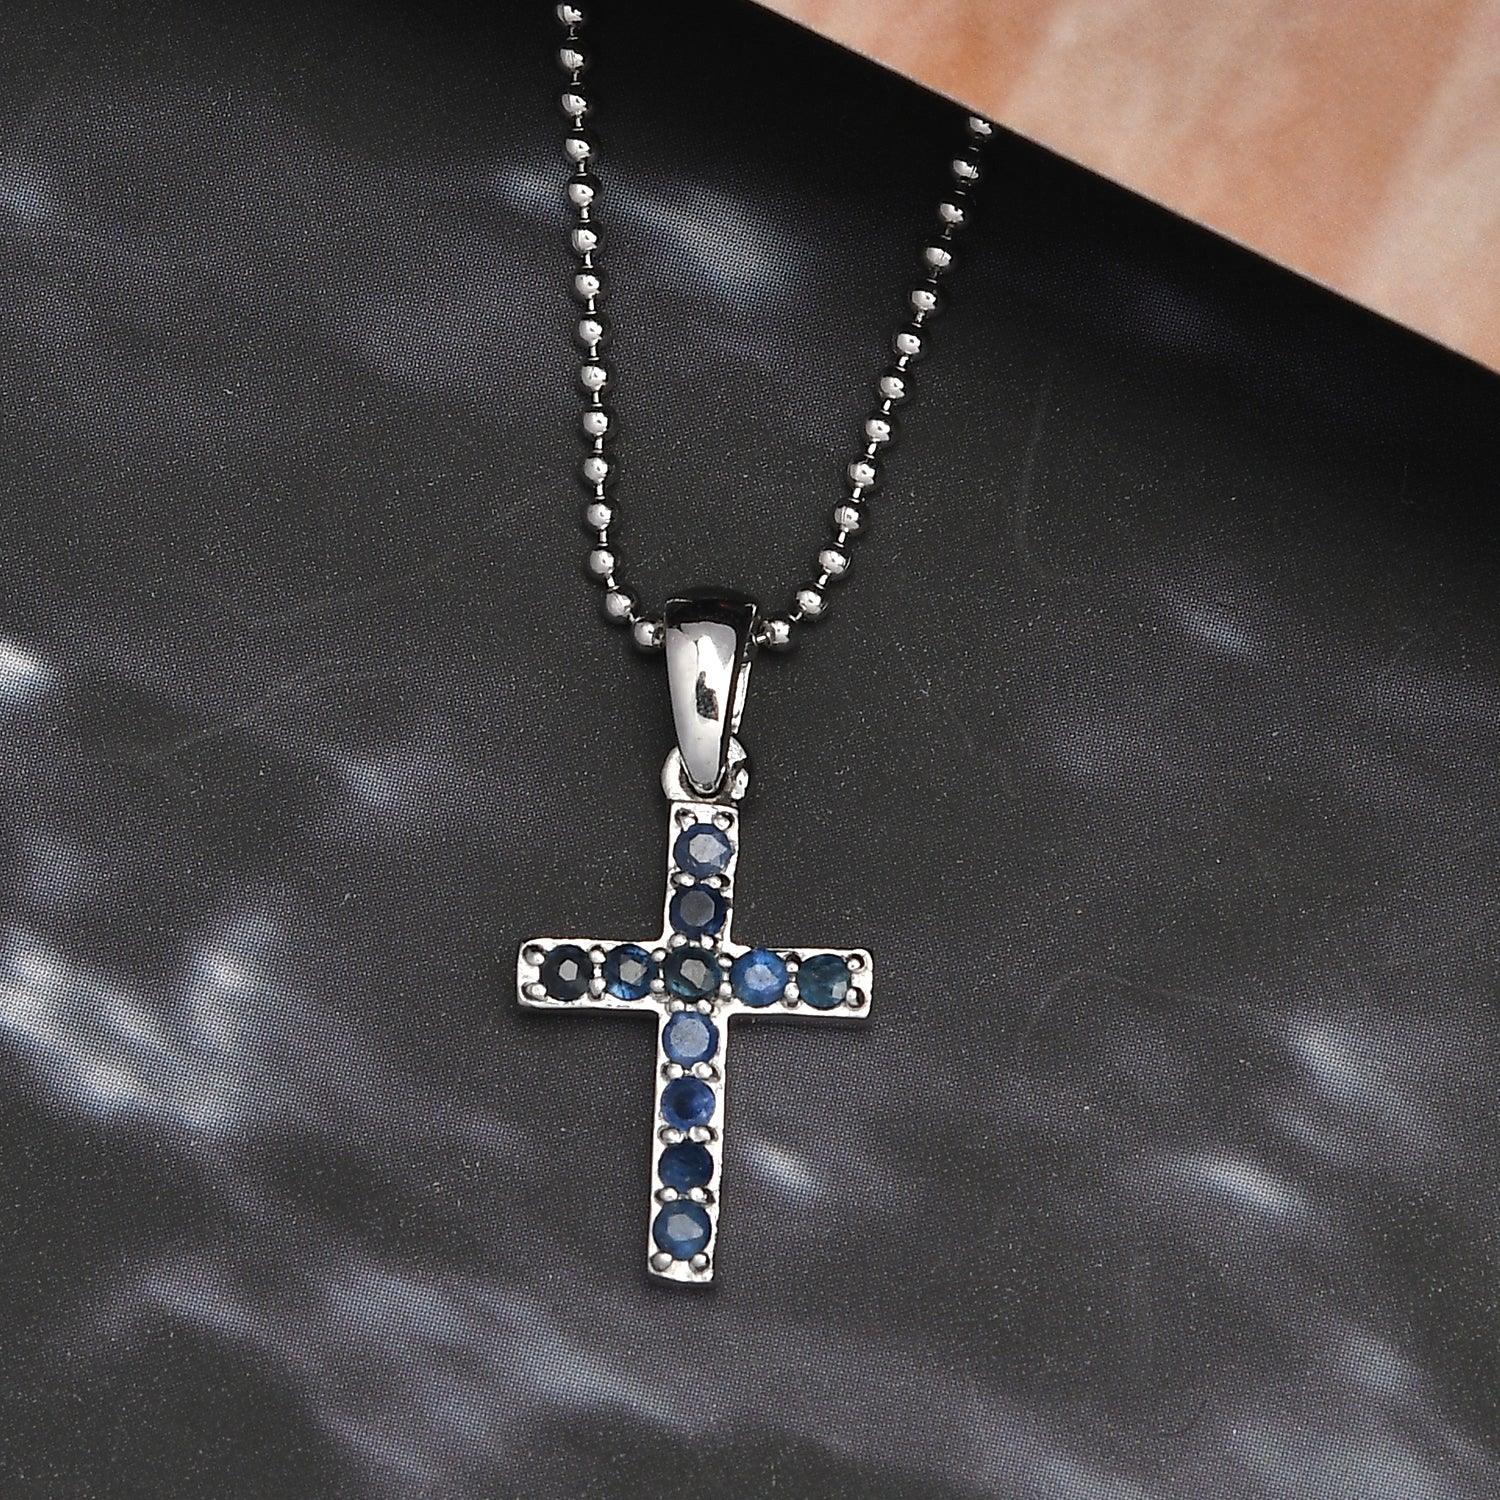 Dainty Cross Pendant Necklace, 925 Sterling Silver, Precious Gemstone Cross Necklace, Gold Cross, Religious necklace for girls - Inspiring Jewellery